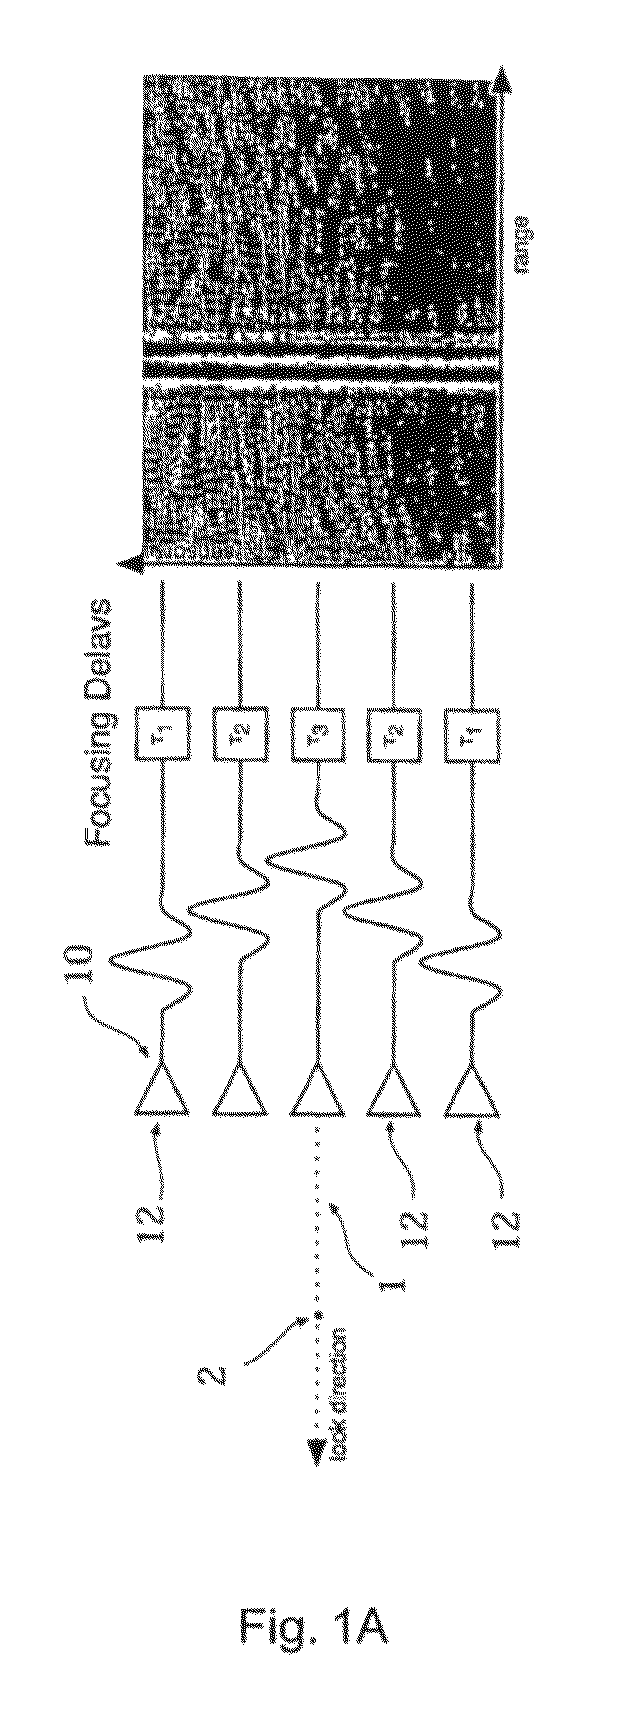 Systems and method for adaptive beamforming for image reconstruction and/or target/source localization